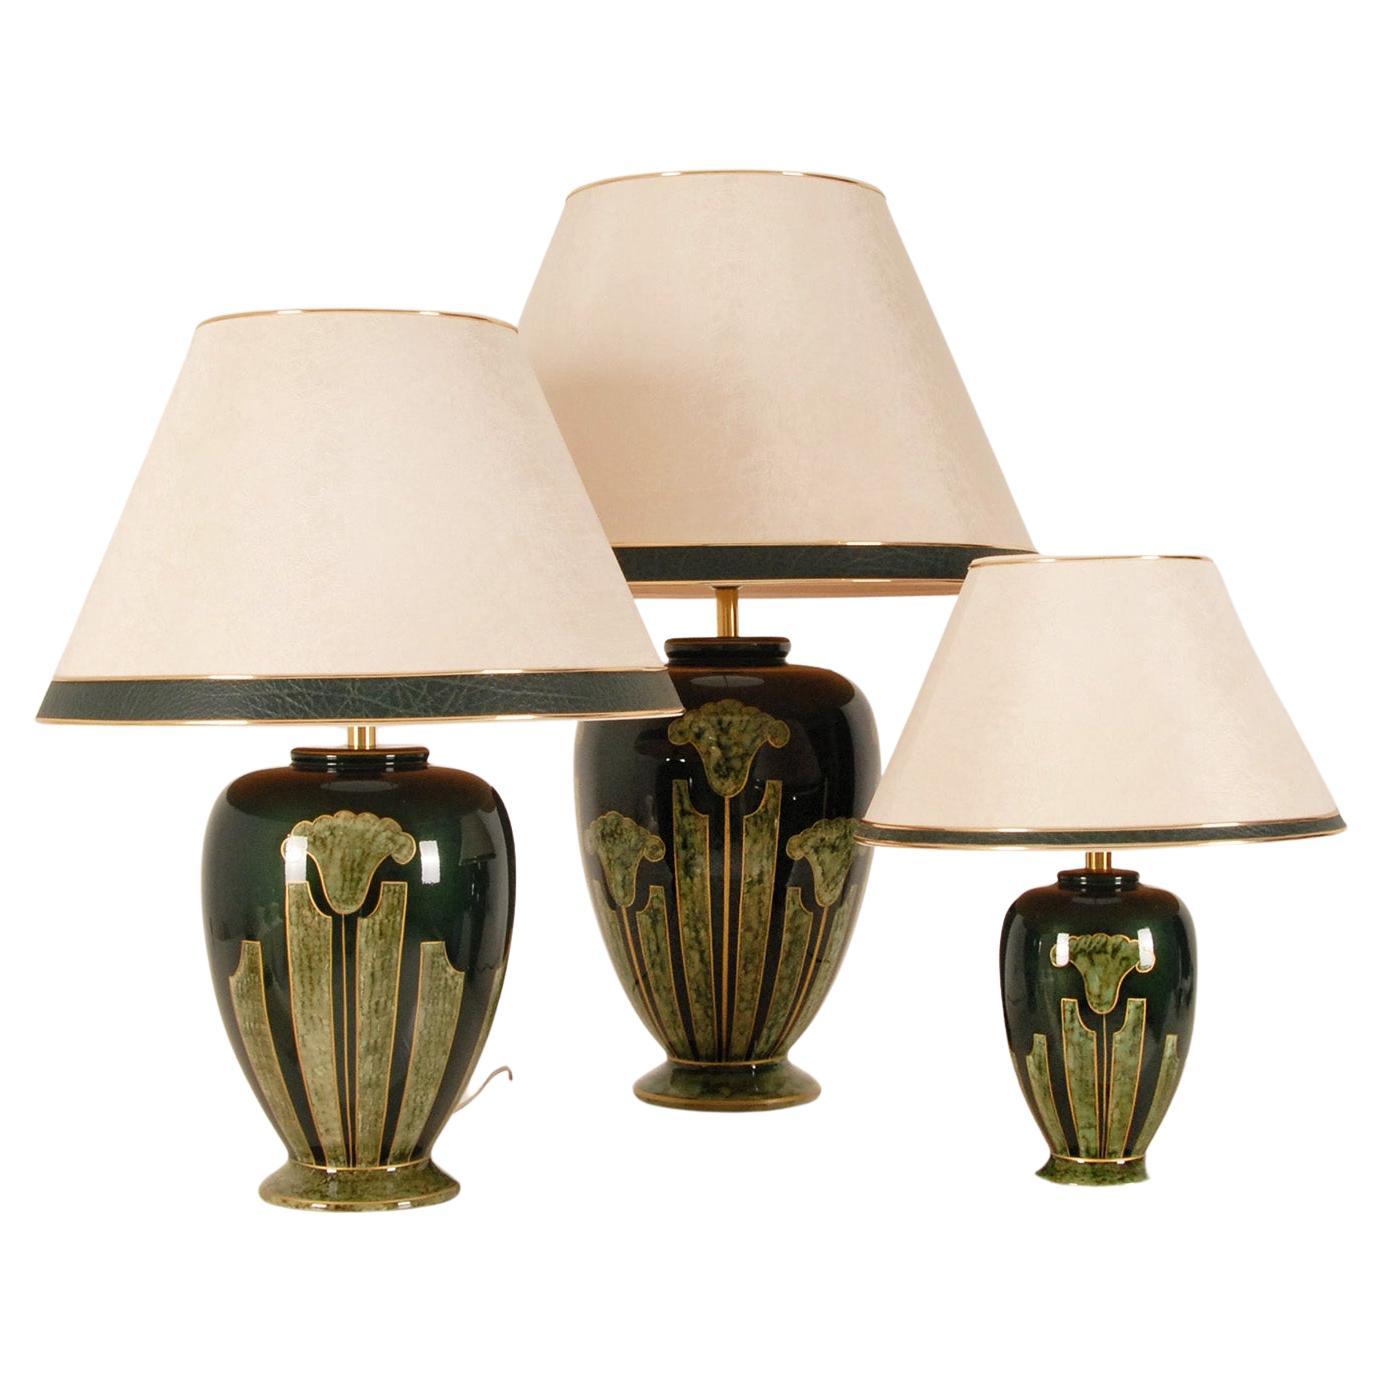 Vintage French Ceramic Green and Gold Table Lamps Marble Metallic, Set of 3 For Sale